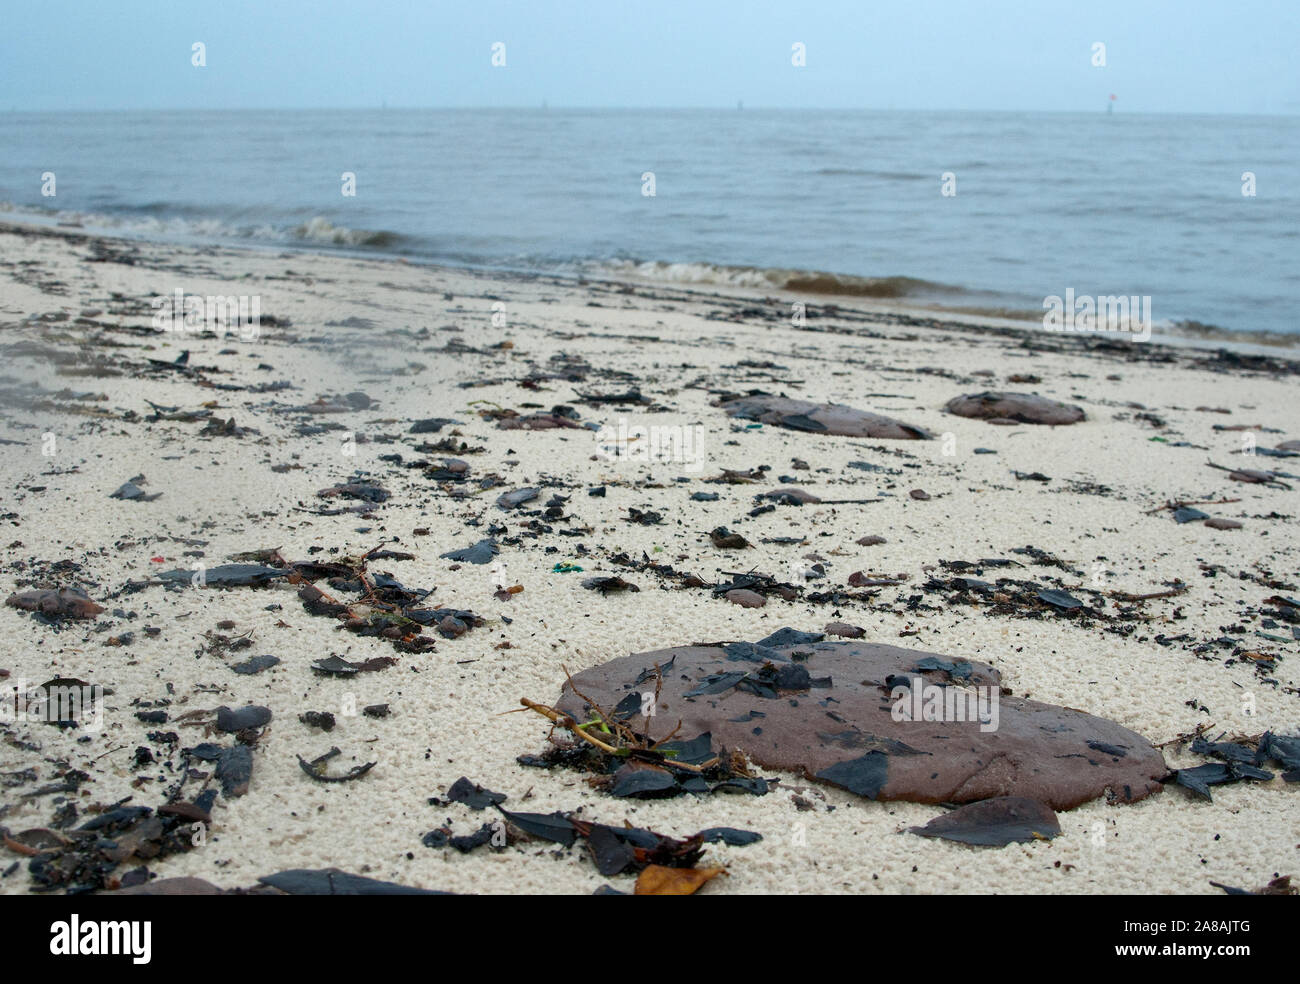 Tar patties of oil from the BP oil spill litter the beach in Gulfport, Mississippi, June 30, 2010. Stock Photo